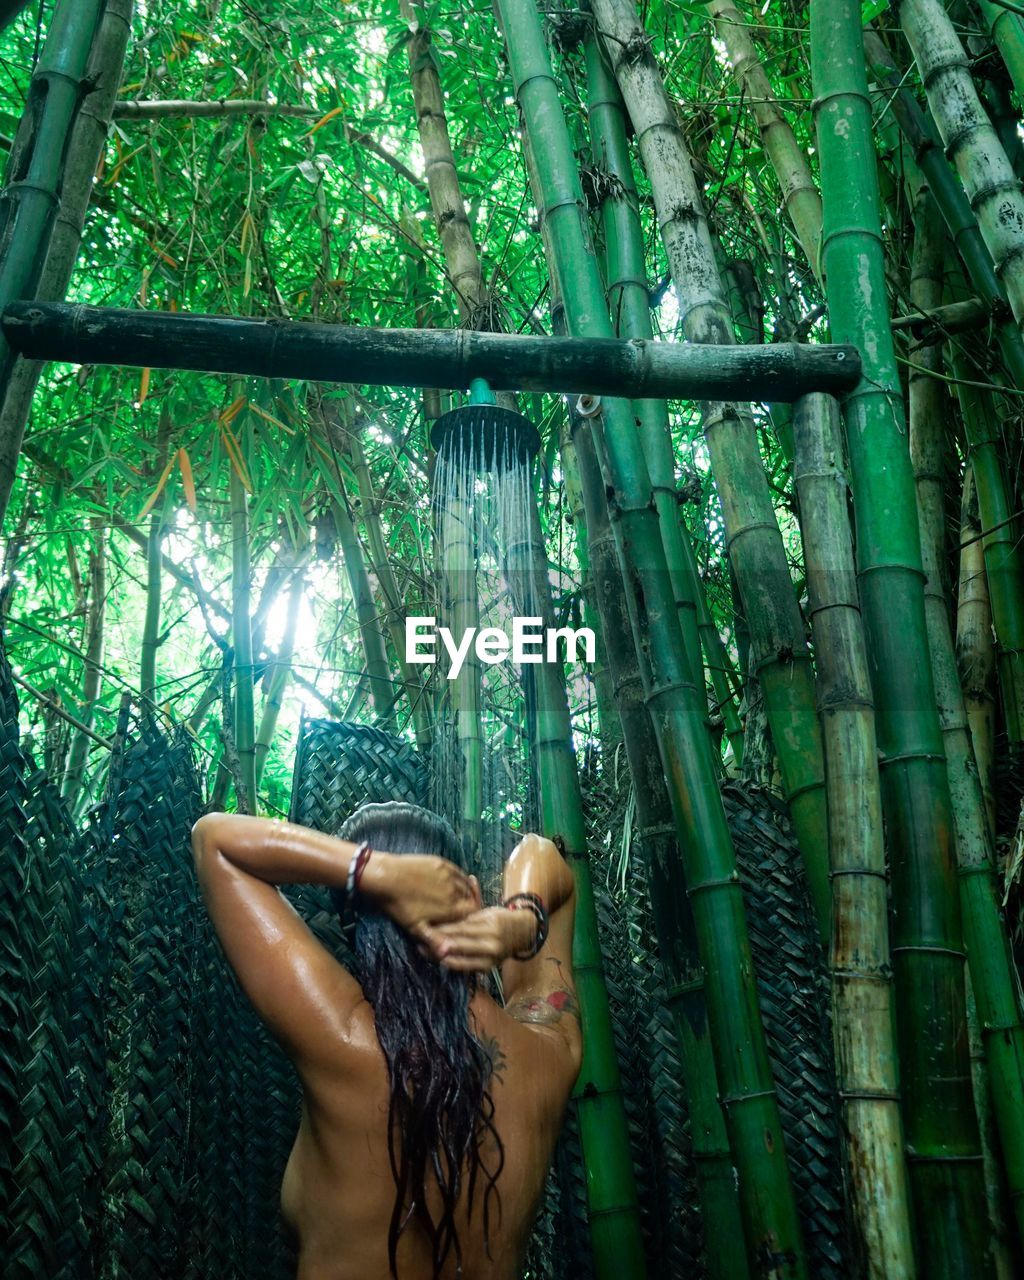 Rear view of shirtless woman taking showing amidst bamboo